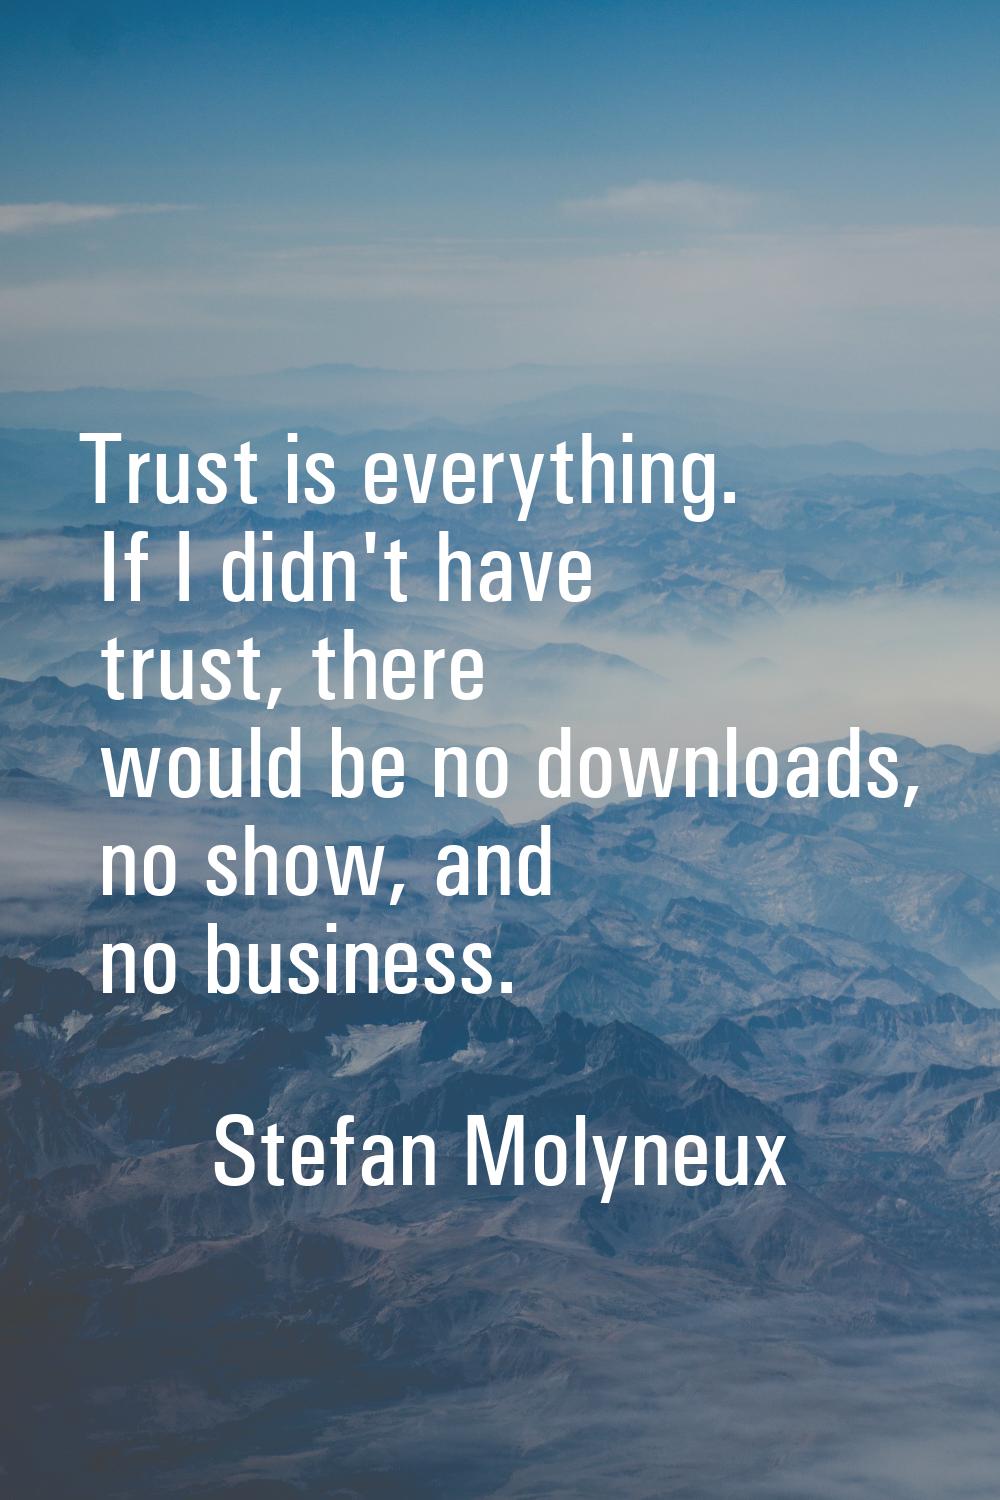 Trust is everything. If I didn't have trust, there would be no downloads, no show, and no business.